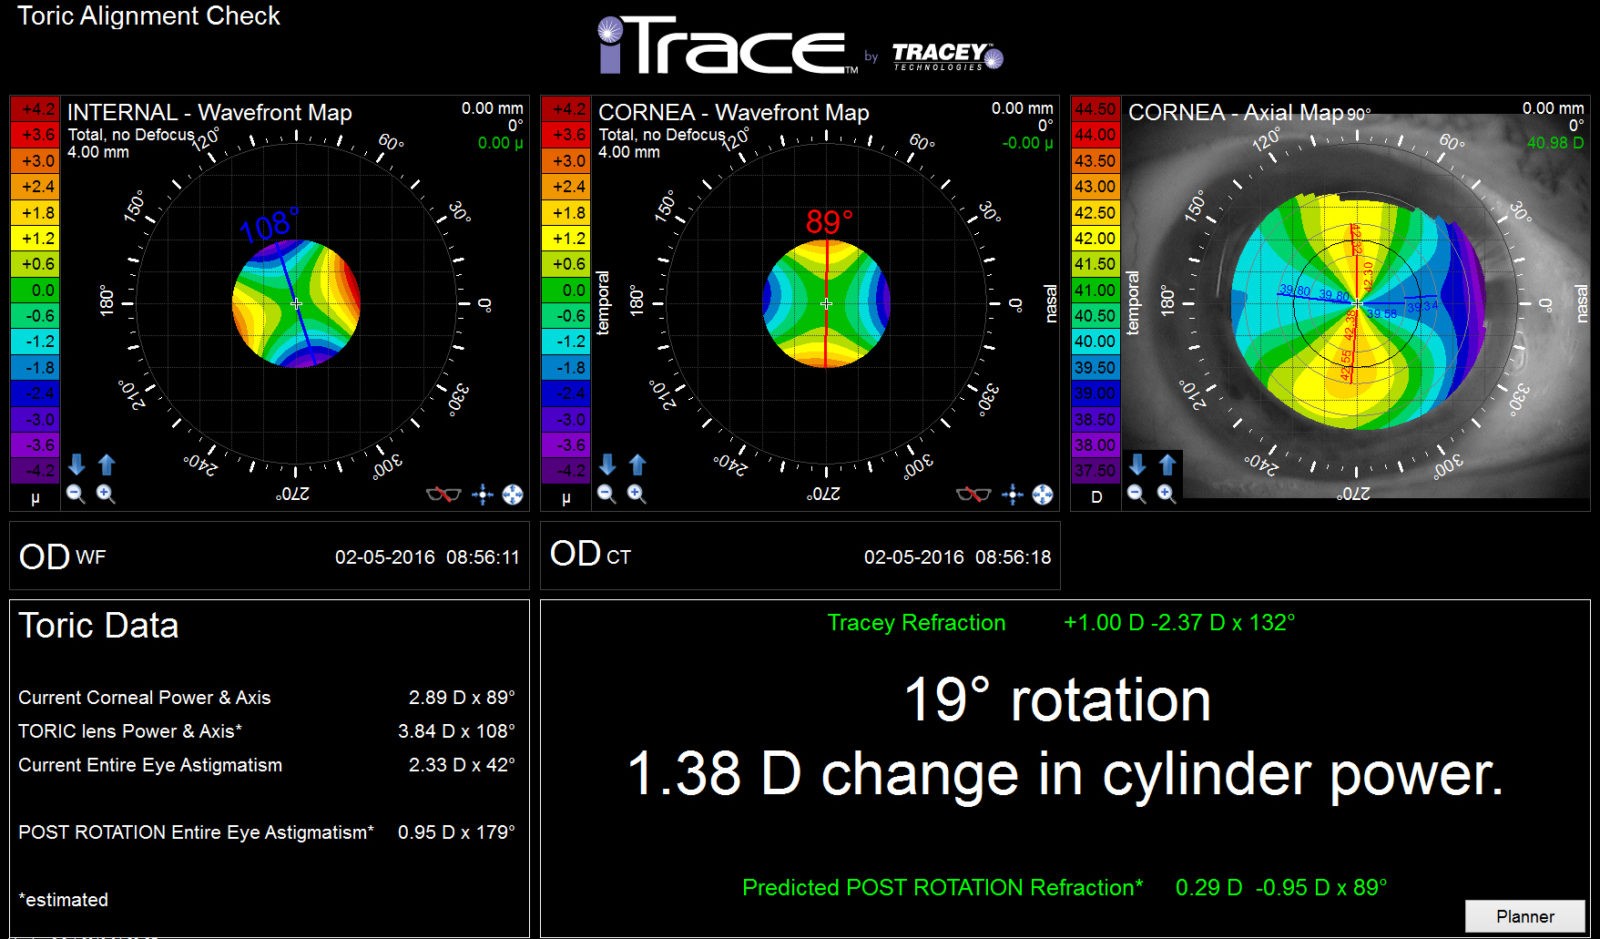 itrace eye scan toric alignment check